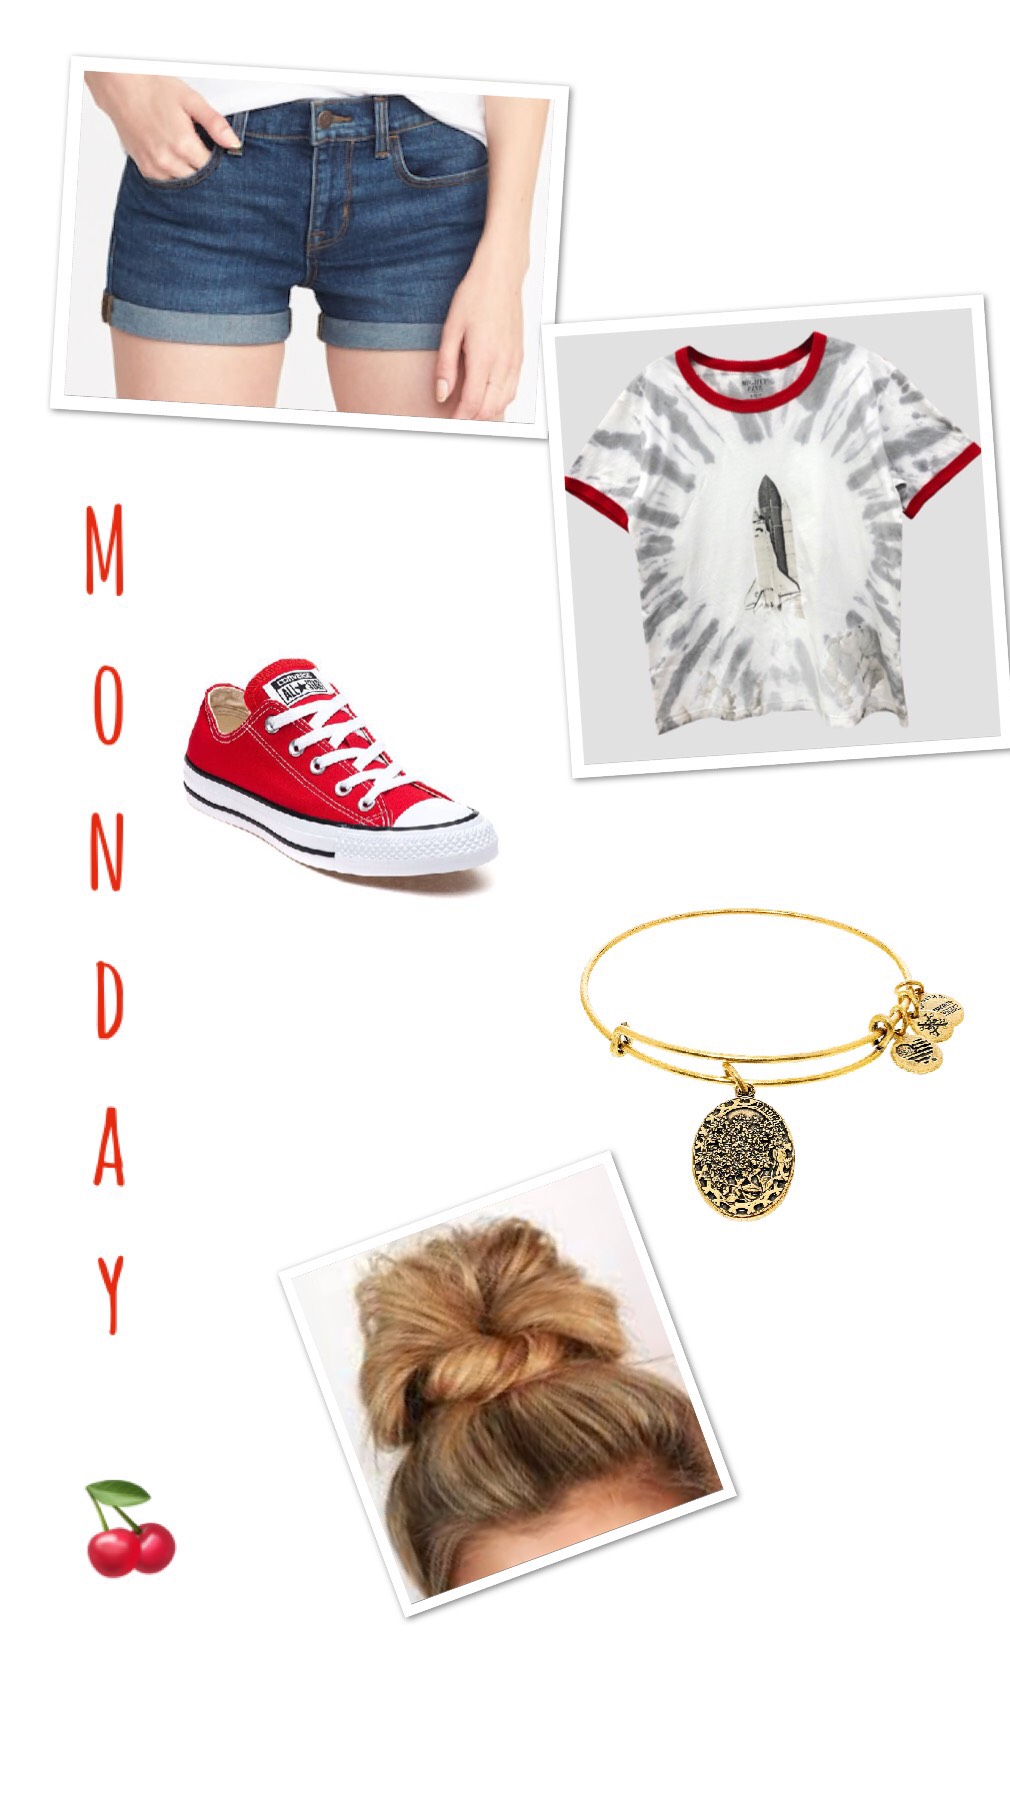 Monday🍒 shirt-target🍒shorts- Old Navy🍒 shoes-red converse 🍒hairstyle-messy bun🍒bracelet- Alex and ani daughter bangle🍒